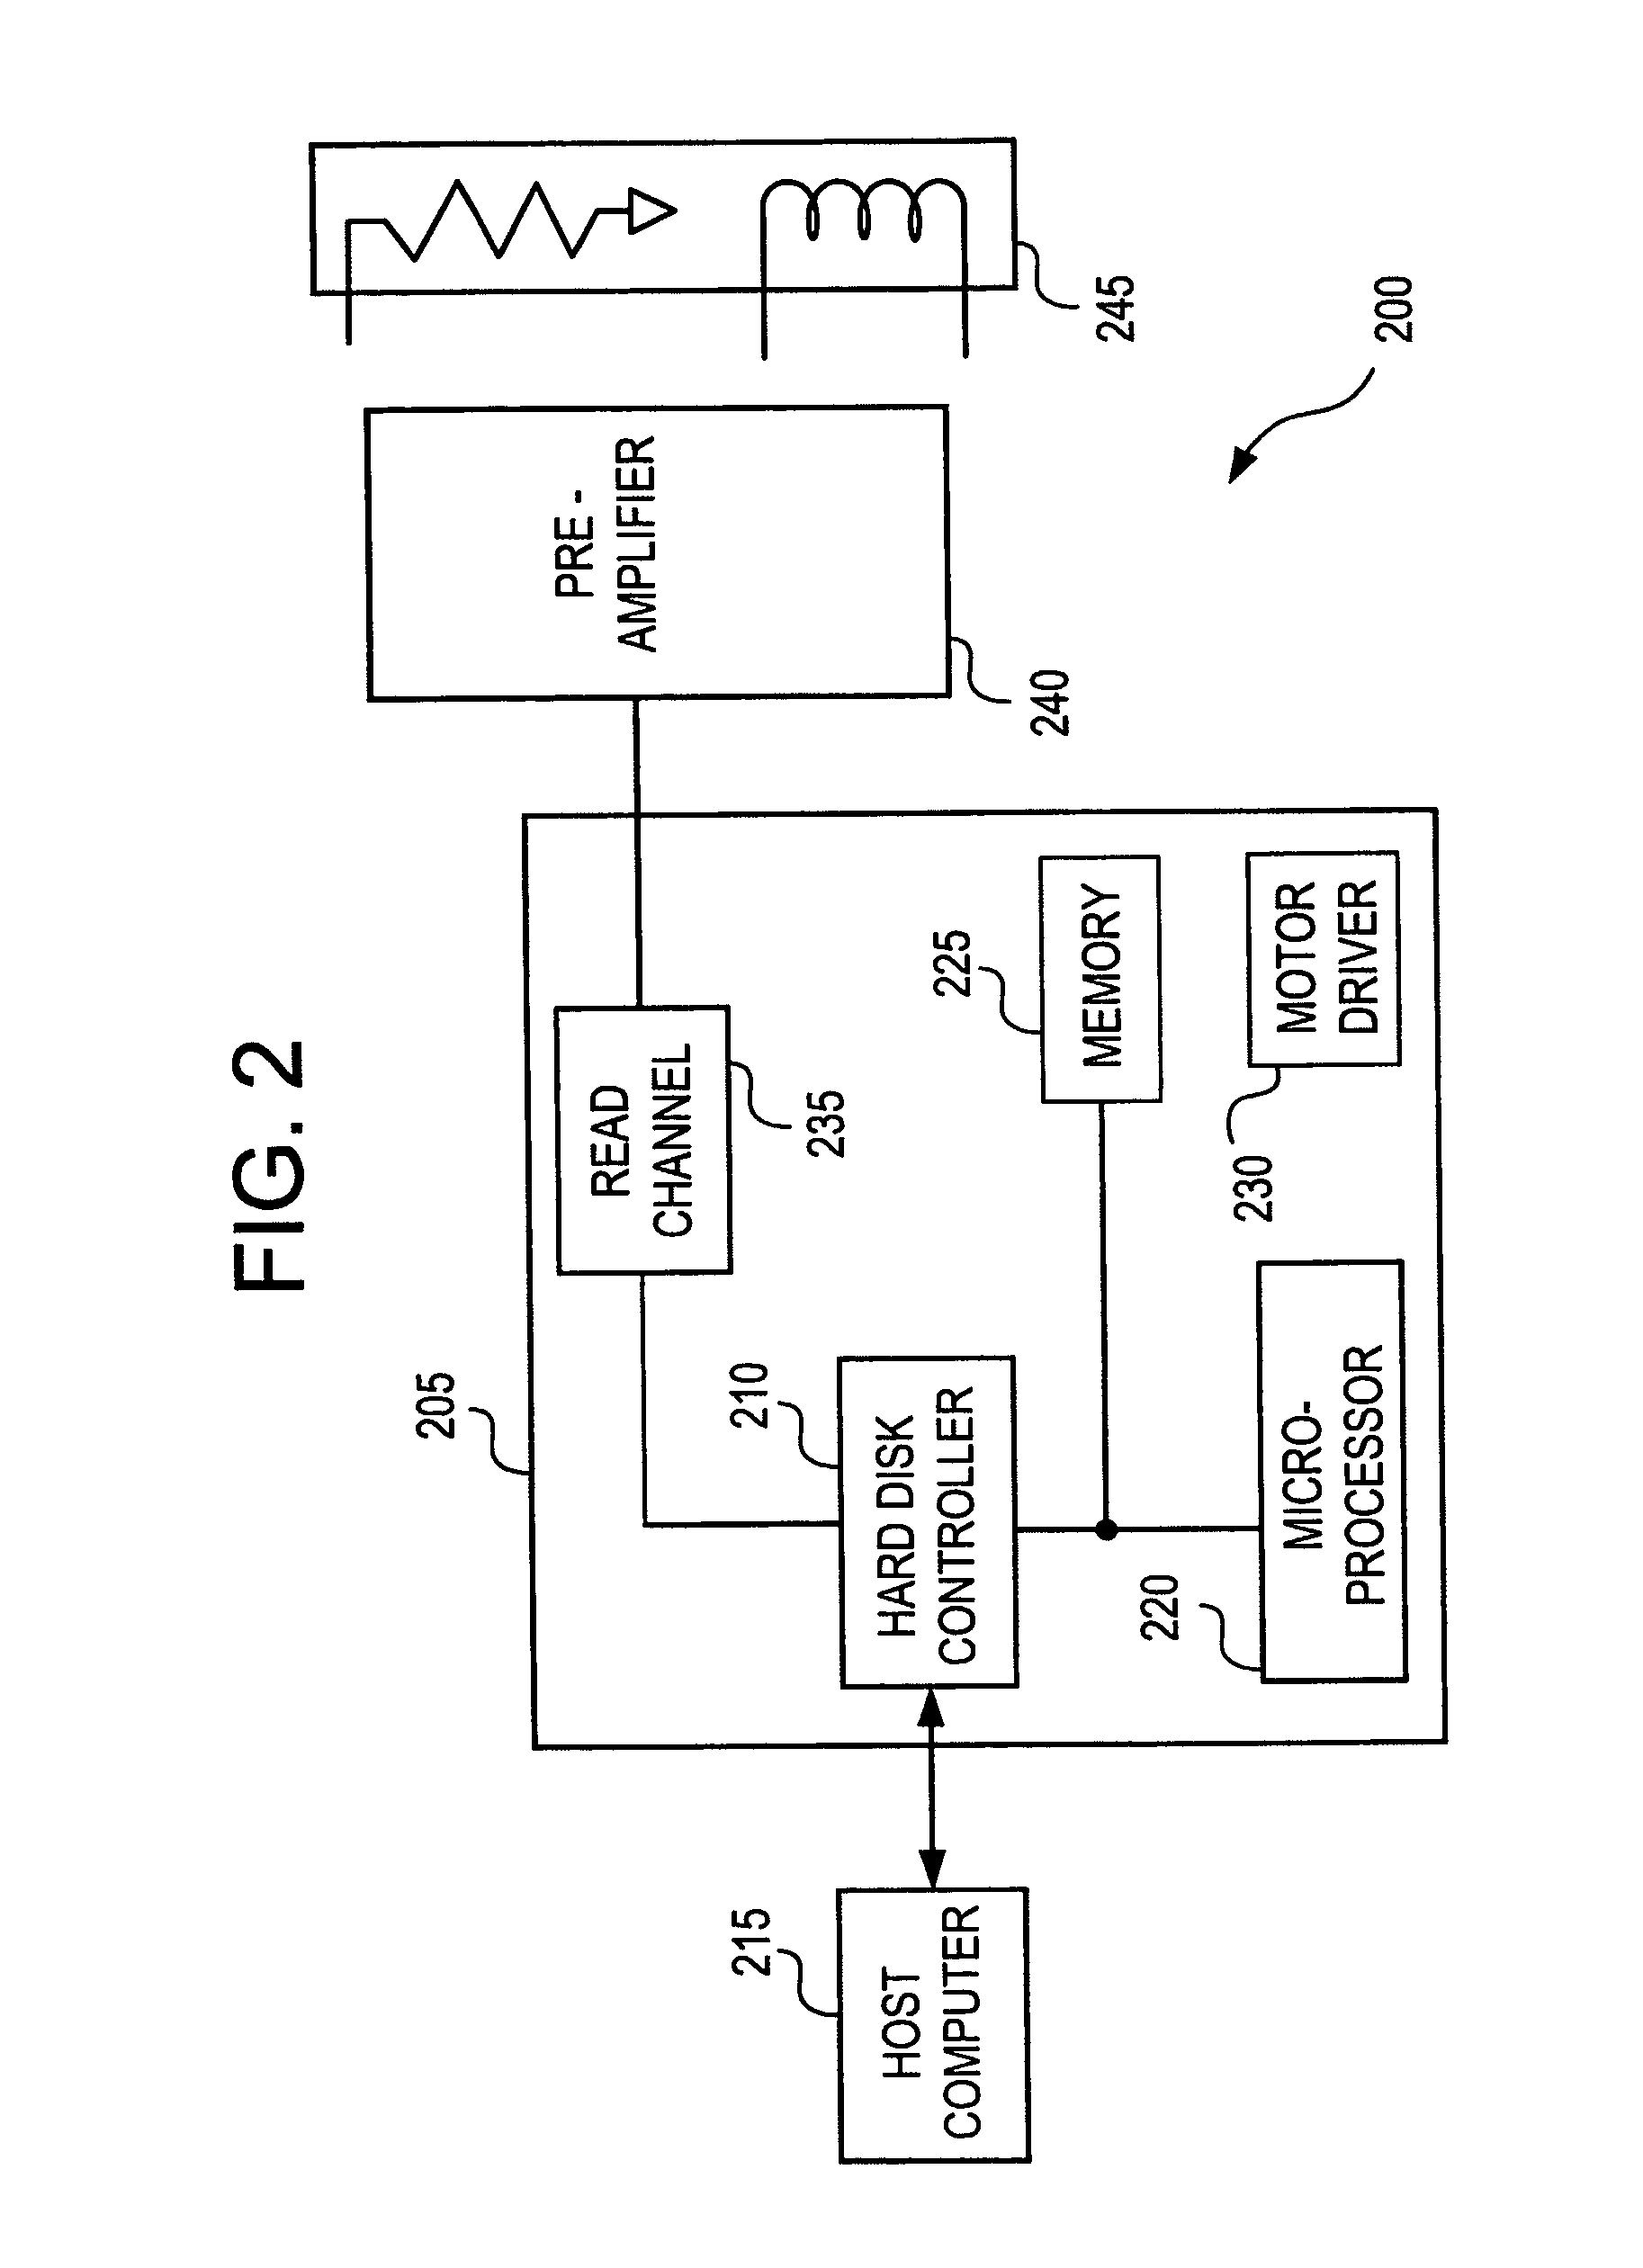 System and method for controlling gain and timing phase in a presence of a first least mean square filter using a second adaptive filter